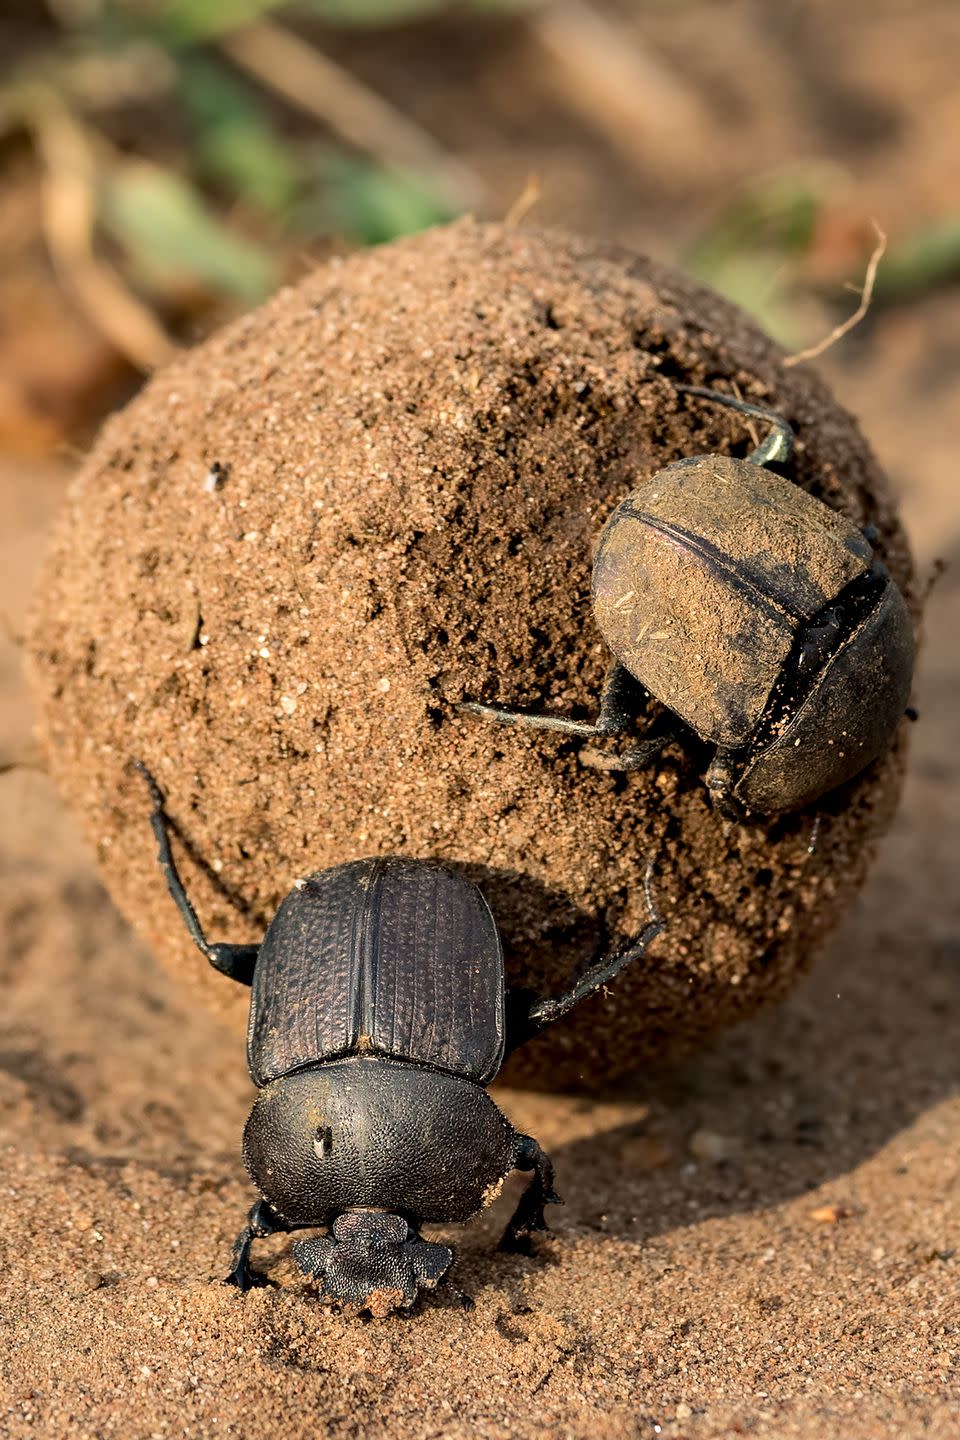 <p>The dung beetle has been deemed the strongest insect on Earth. They’re able to push balls of fresh animal poop (hence their namesake) that weigh more than 200 times their body weight. Researchers documented one individual dung beetle that was pushing a ball that was 1,141 times his body weight, the equivalent of a 150-pound person moving a whopping 80 tons.</p>